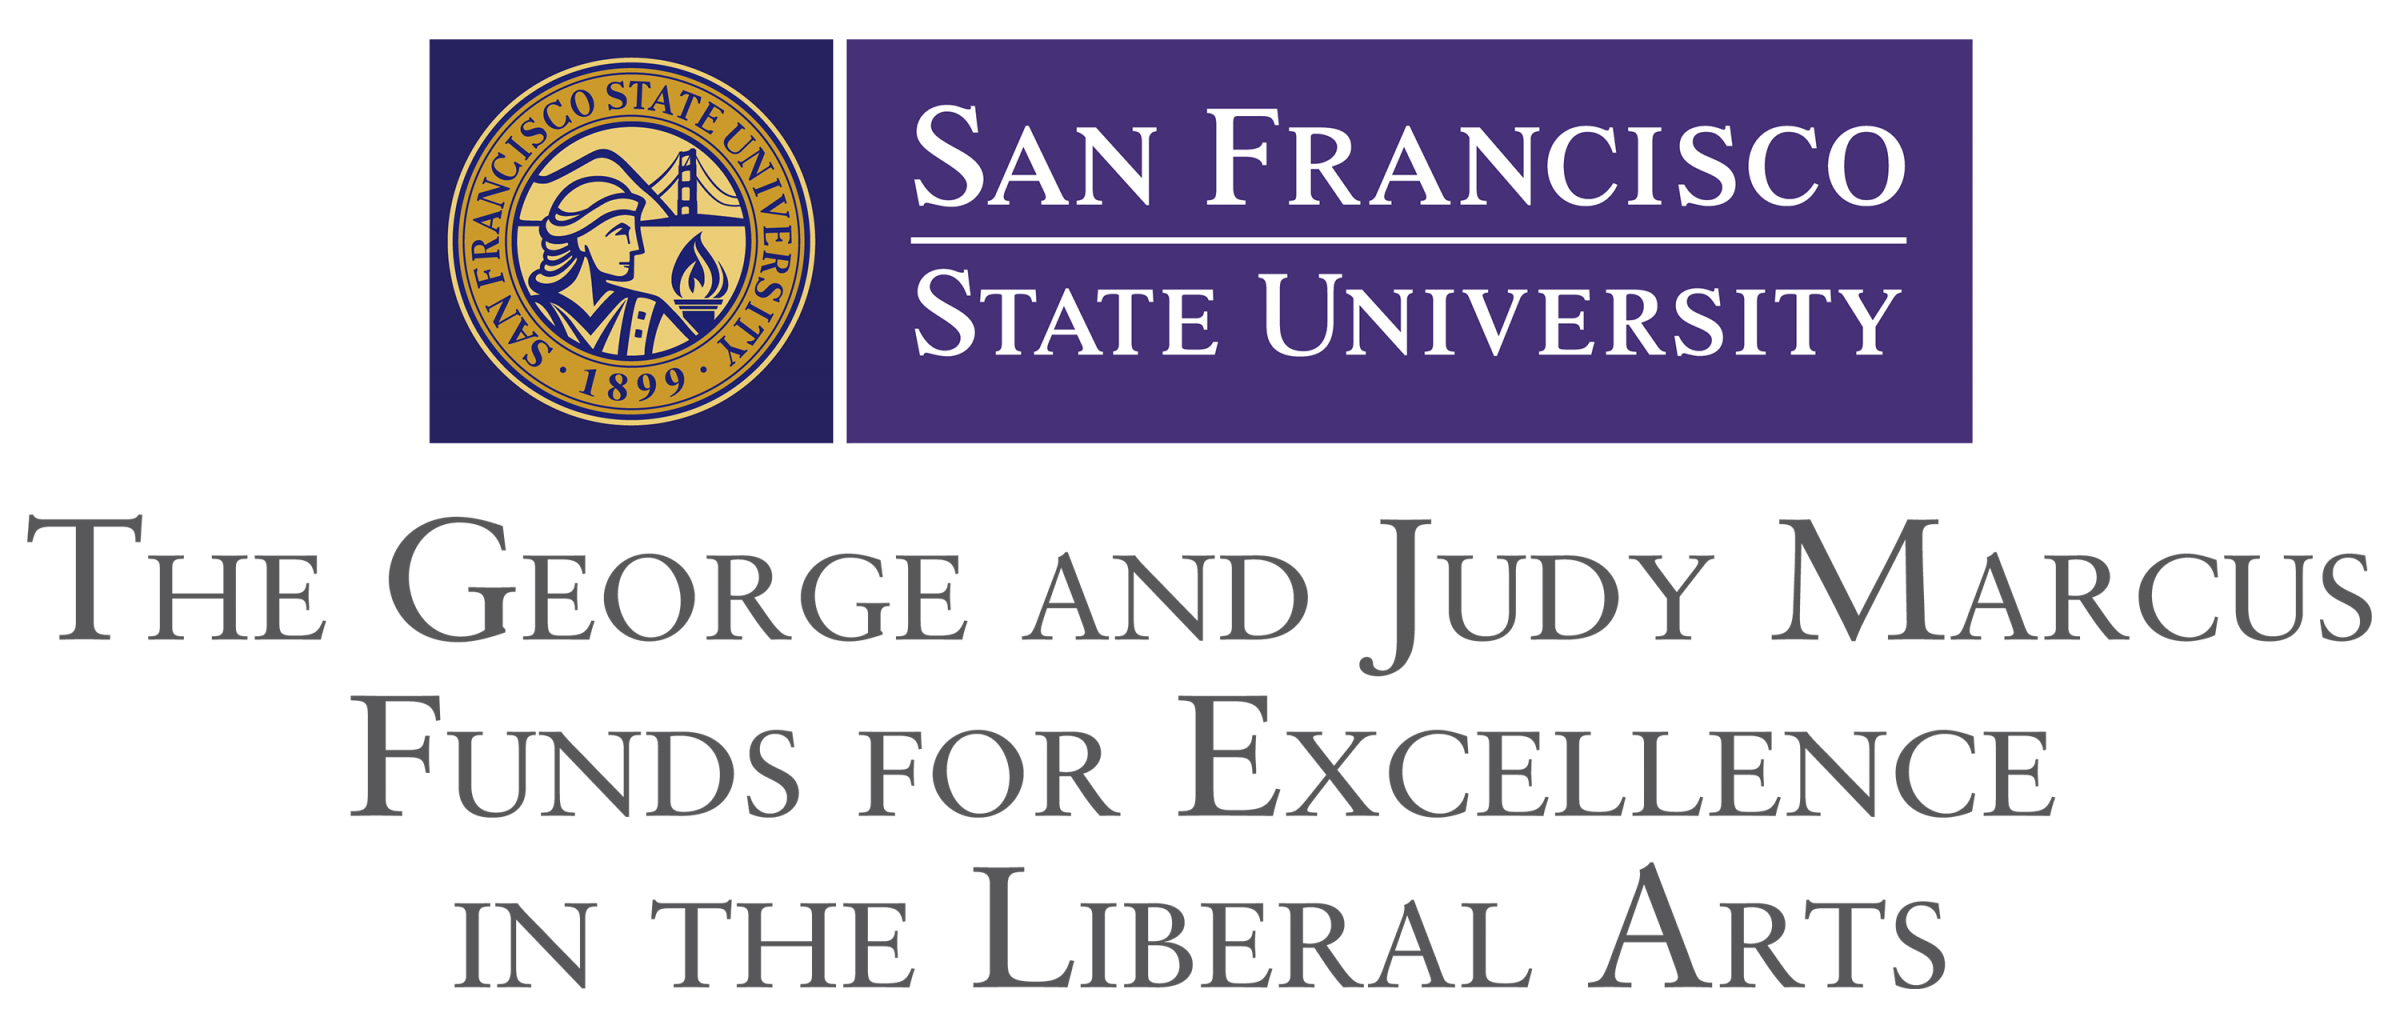 George and Judy Marcus Funds for Excellence in the Liberal Arts